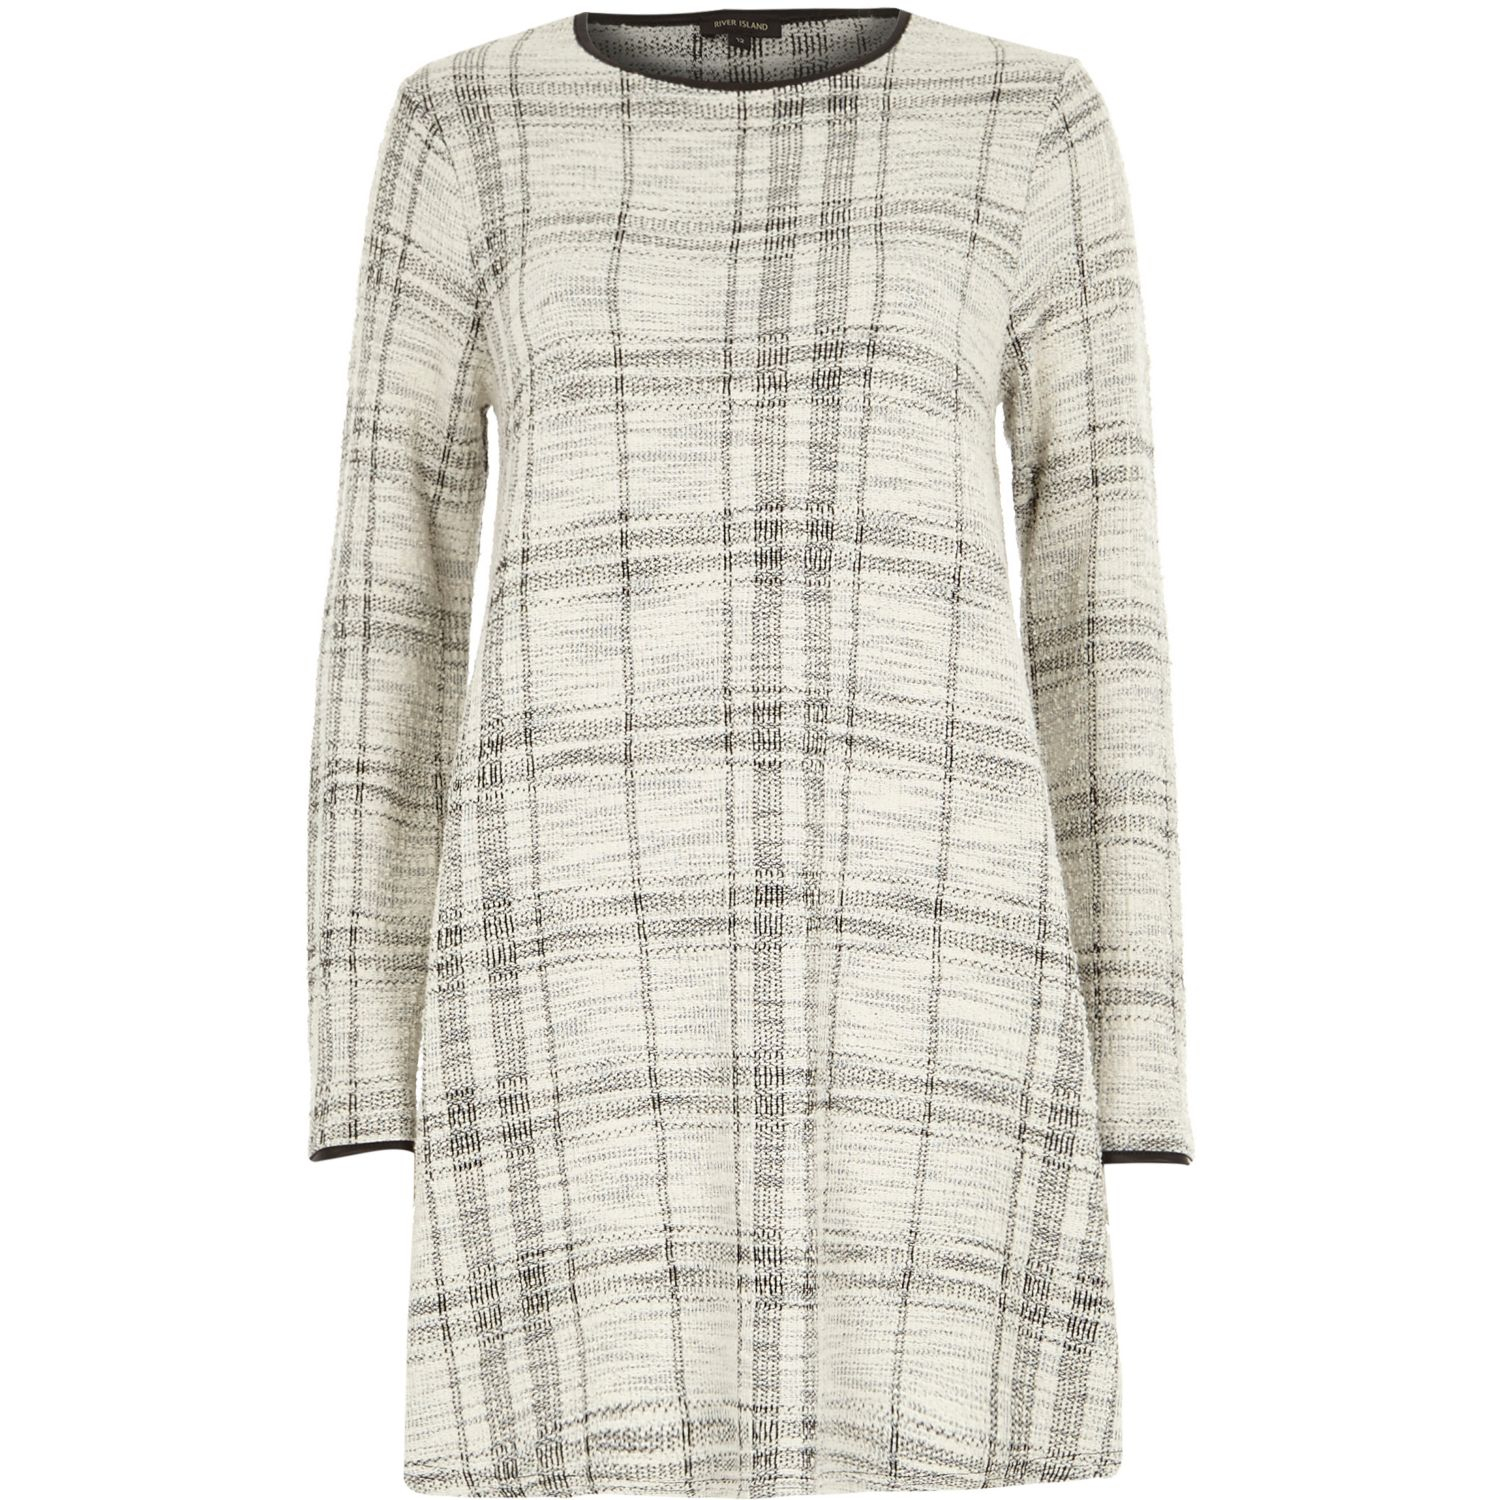 River Island Check Dress & How To Get Attention